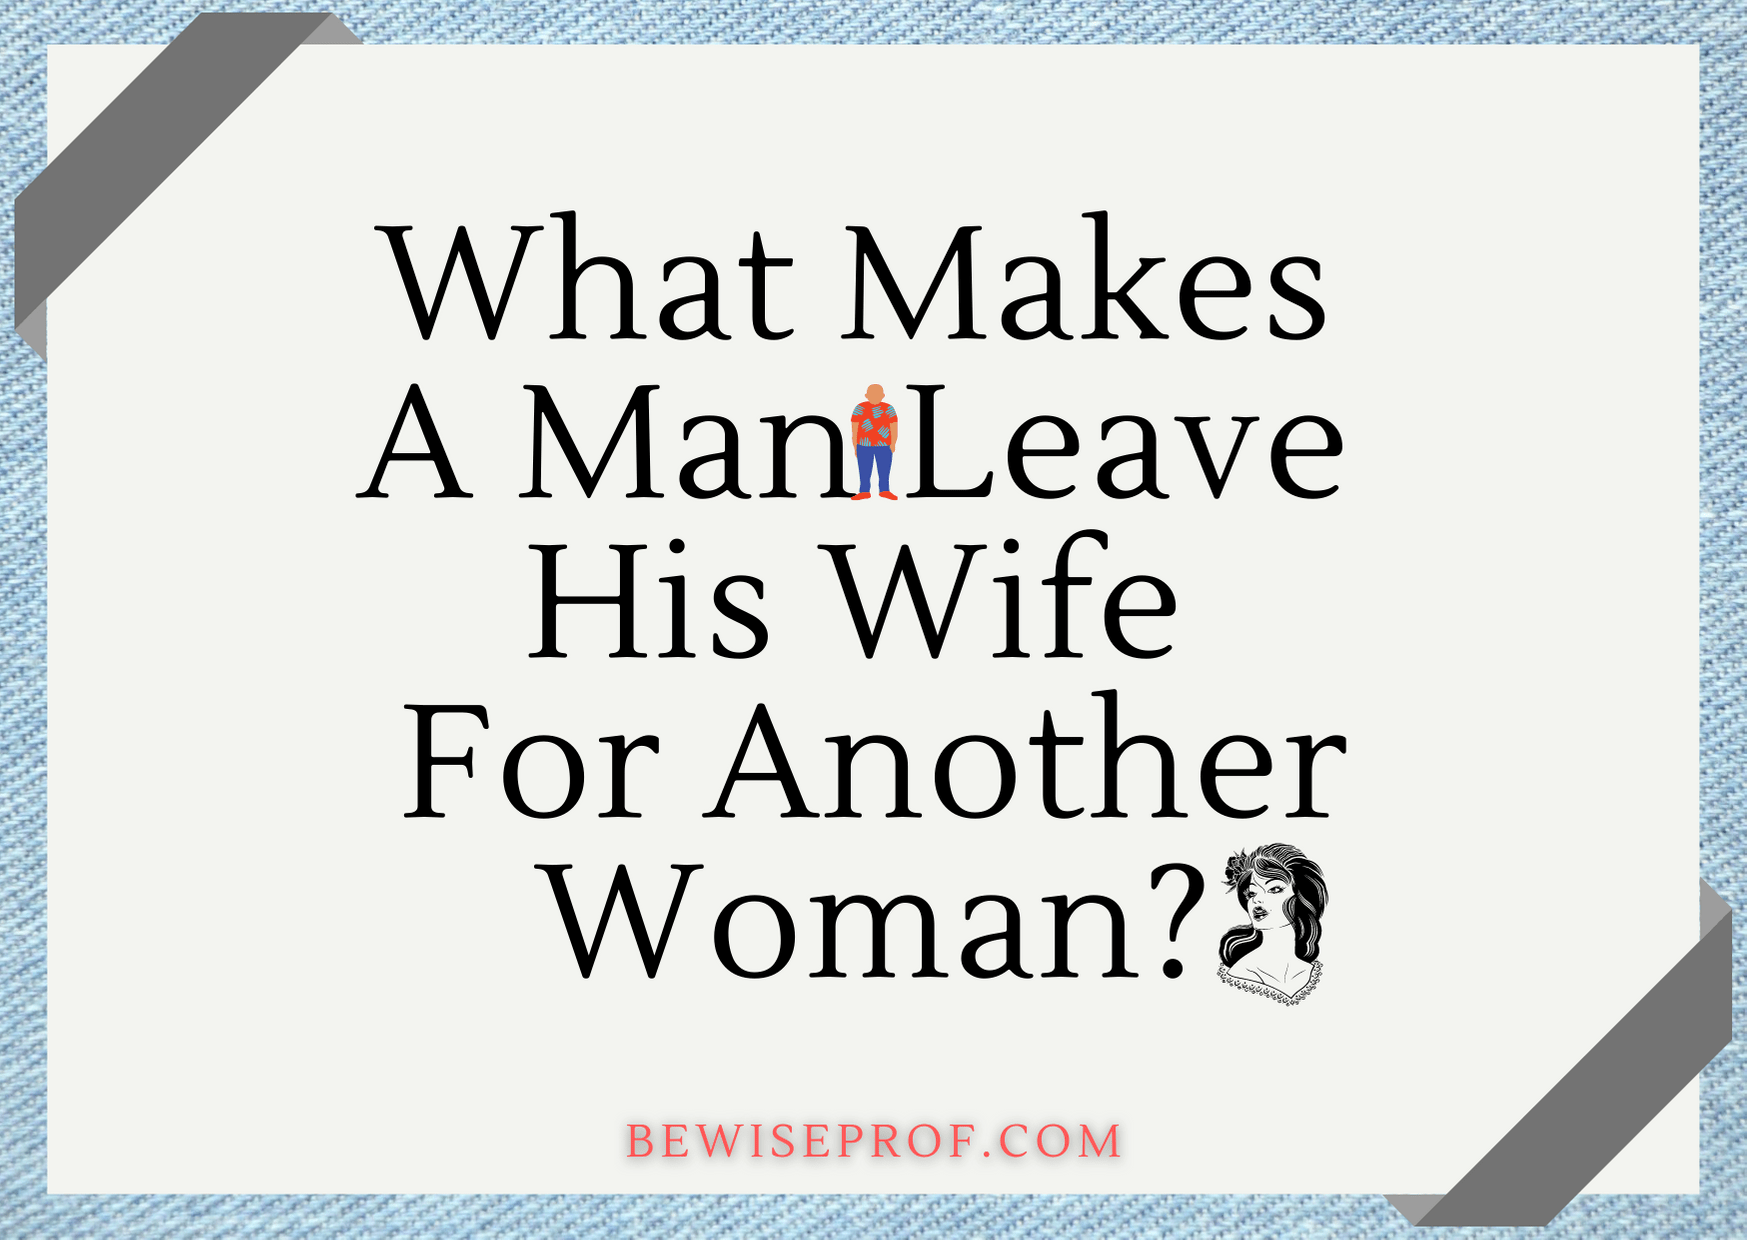 What Makes A Man Leave His Wife For Another Woman?